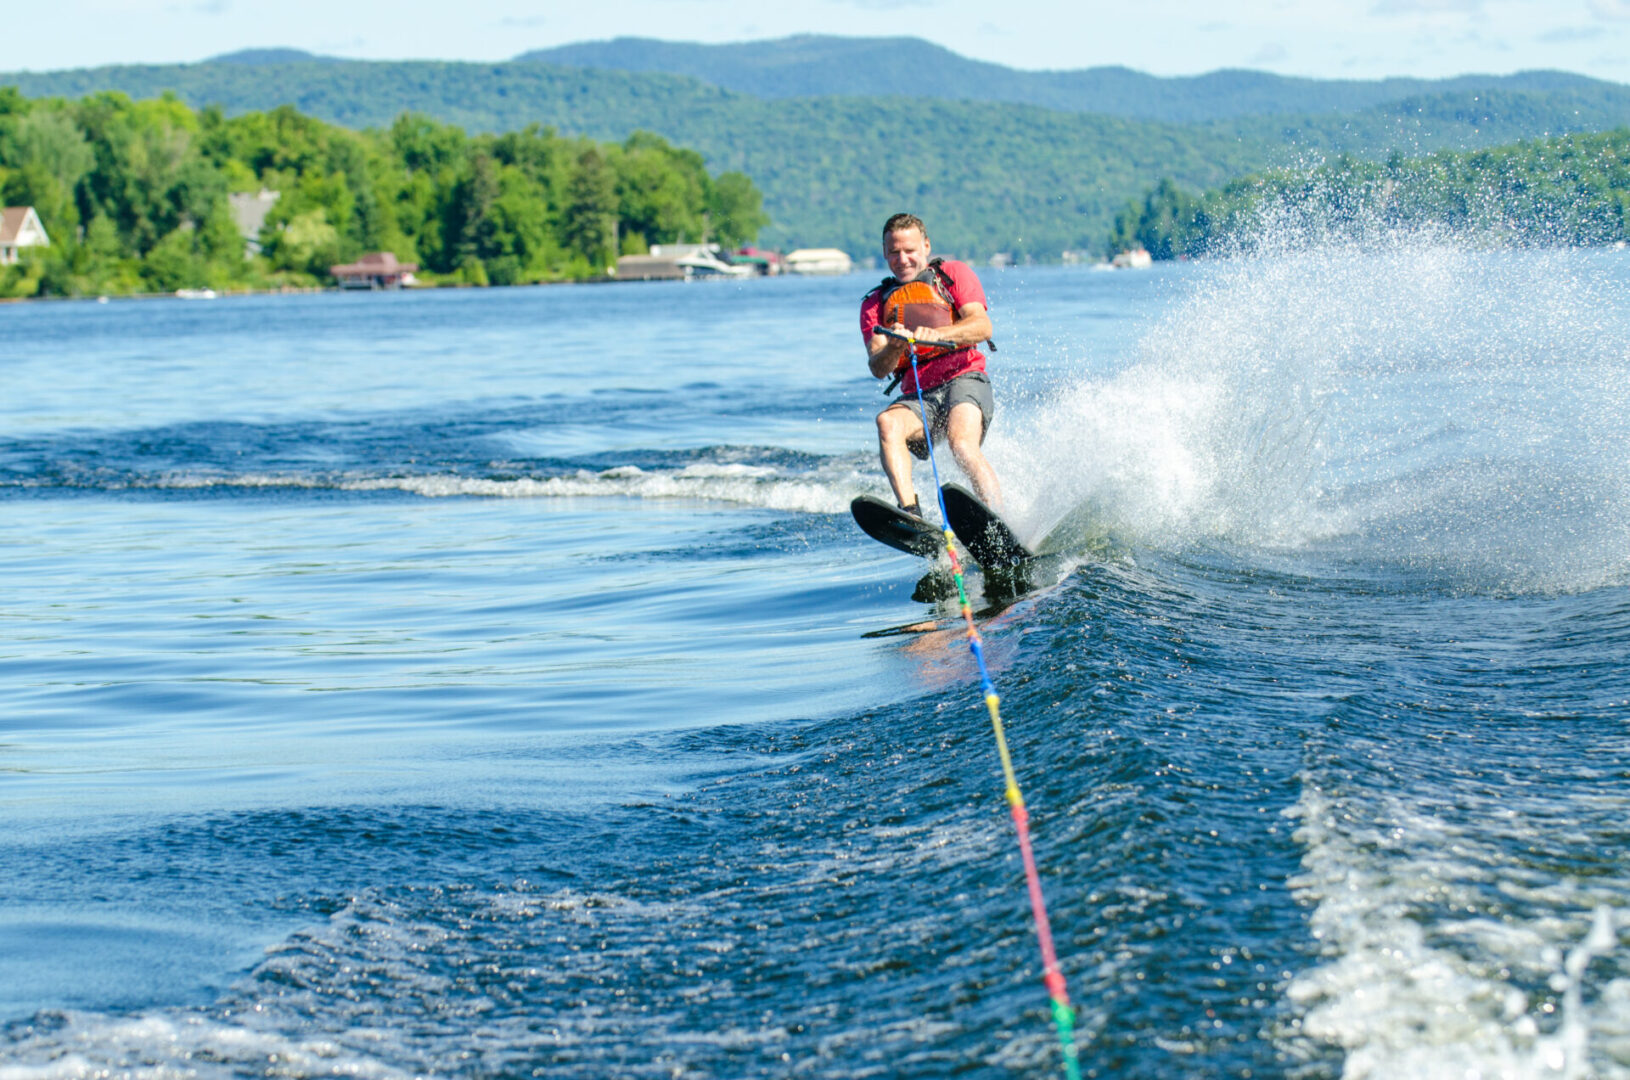 A person on water skis in the middle of a lake.